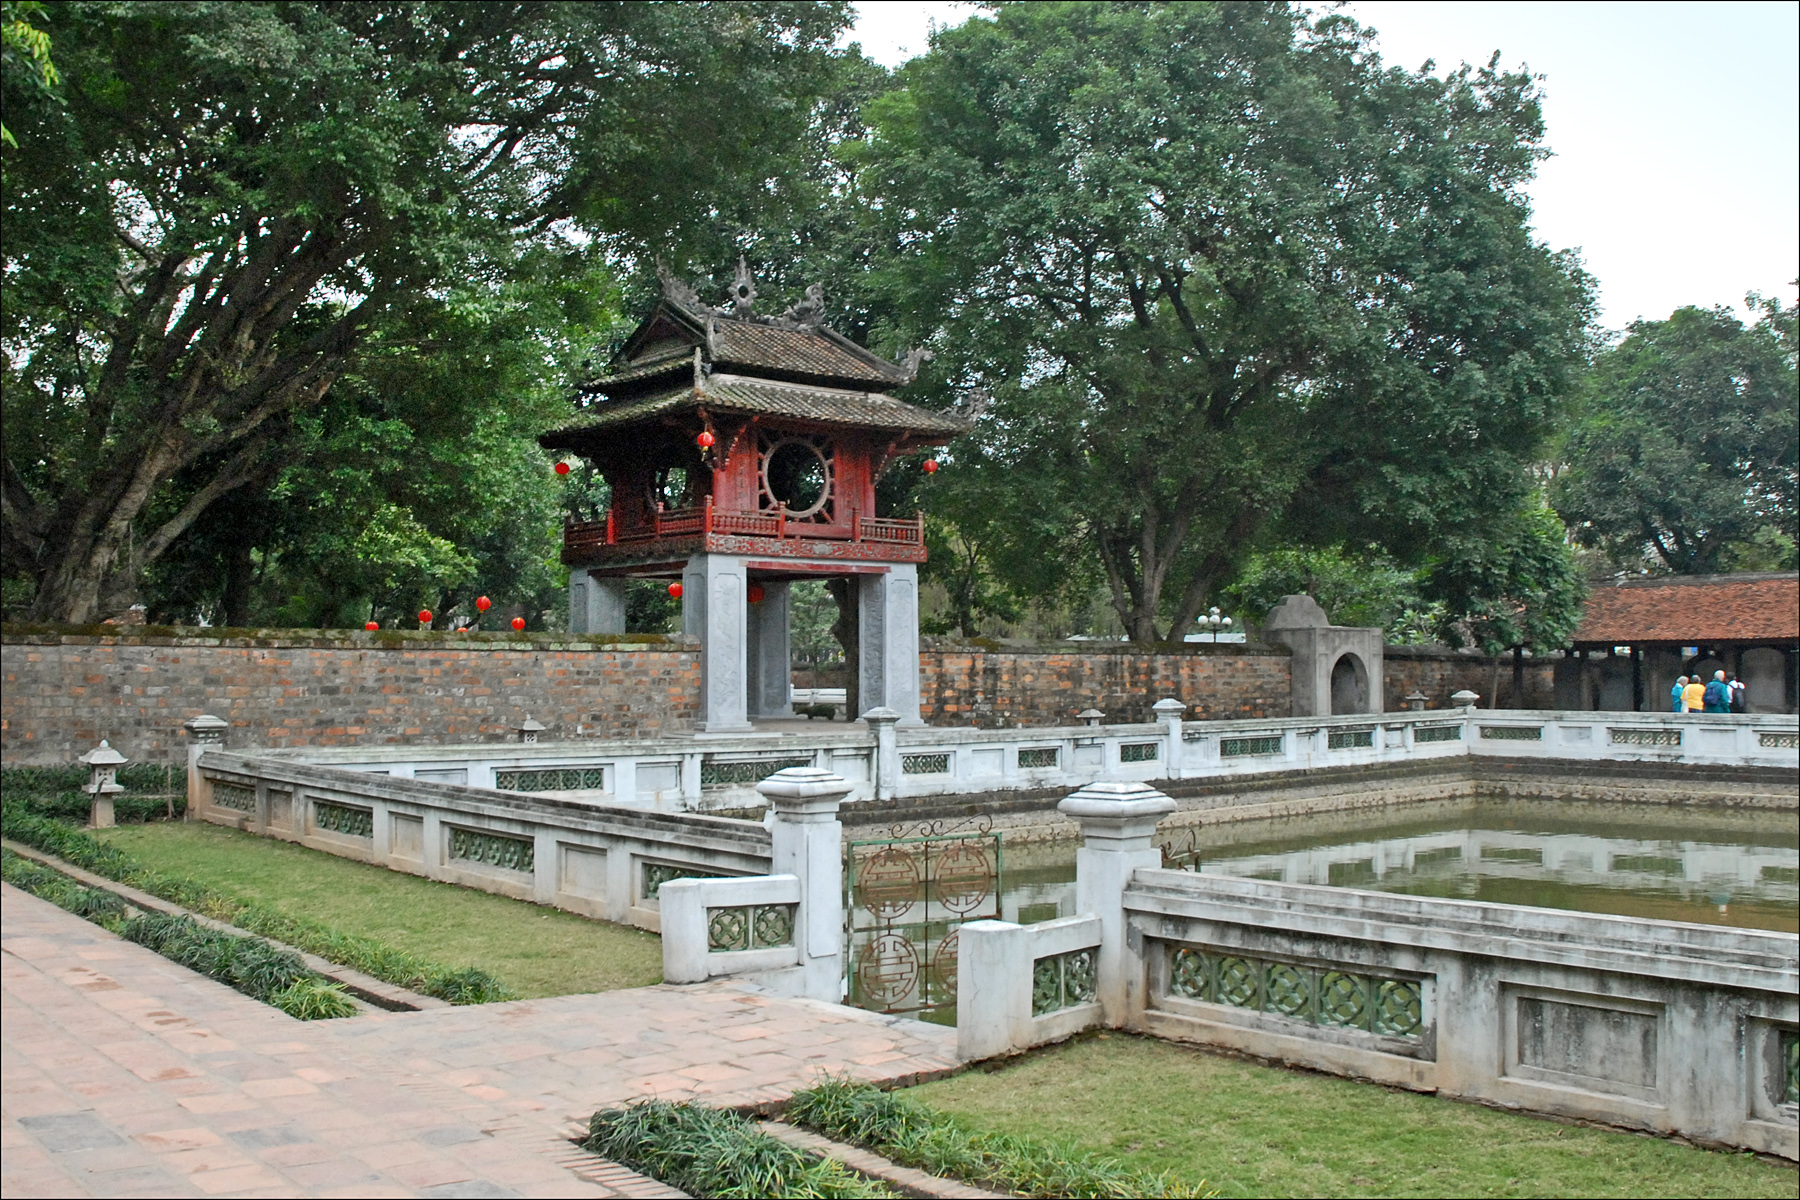 the pagoda with its red roof is near a small pond